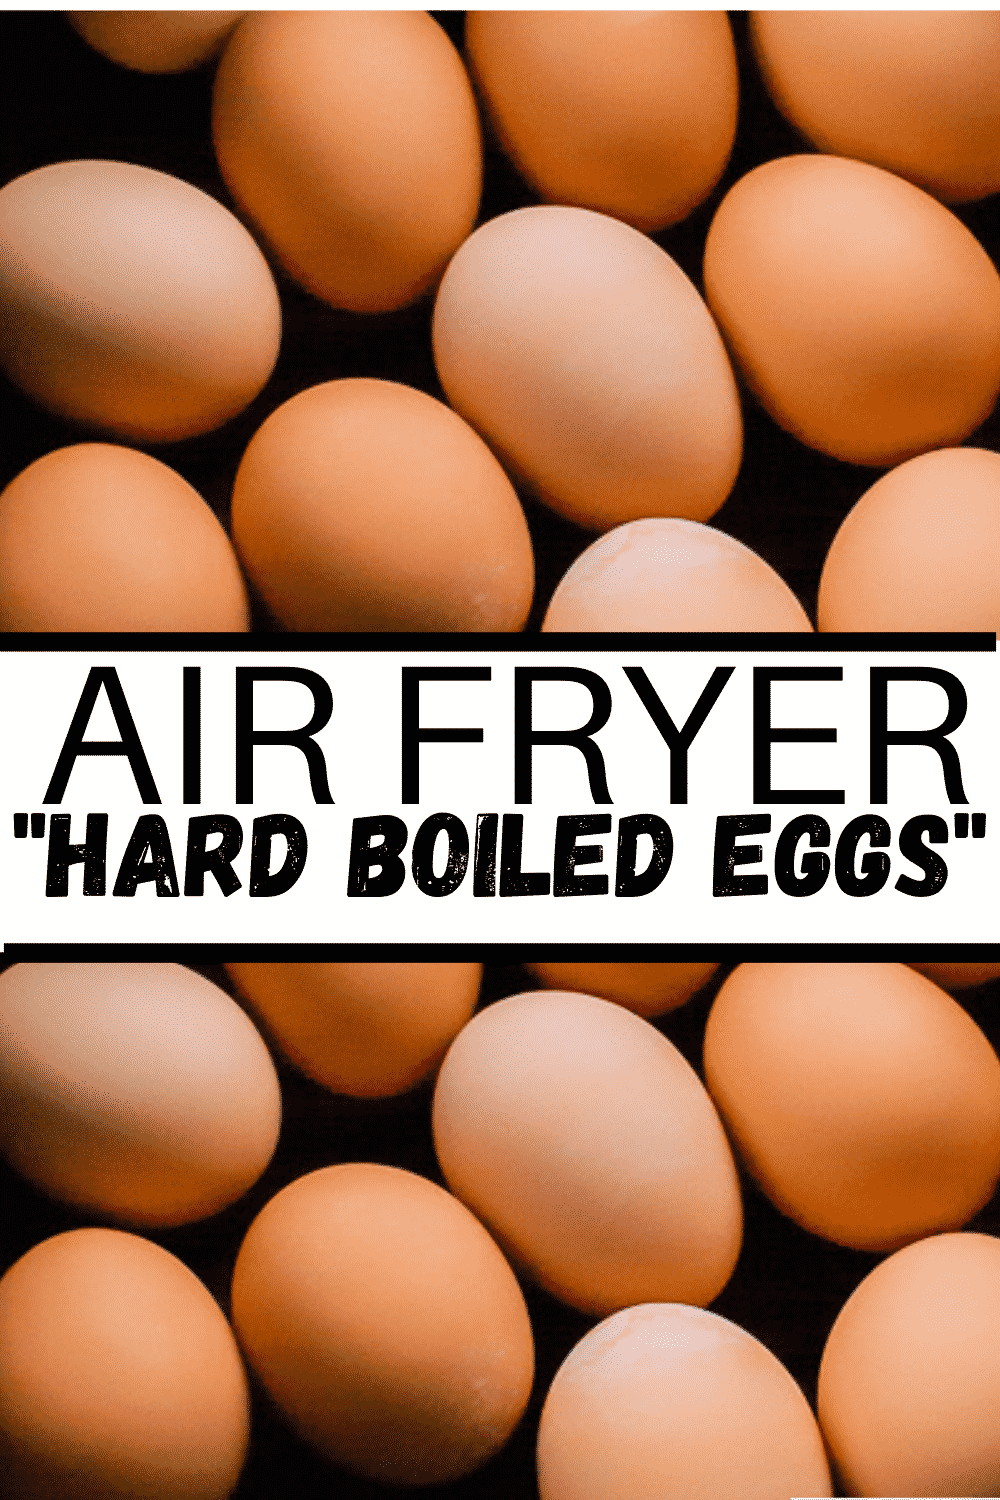 Did you know that you could make hard boiled eggs in the air fryer? Learn how simple it is to make air fryer hard boiled eggs that come out perfectly cooked every time.  via @vegetarianmamma